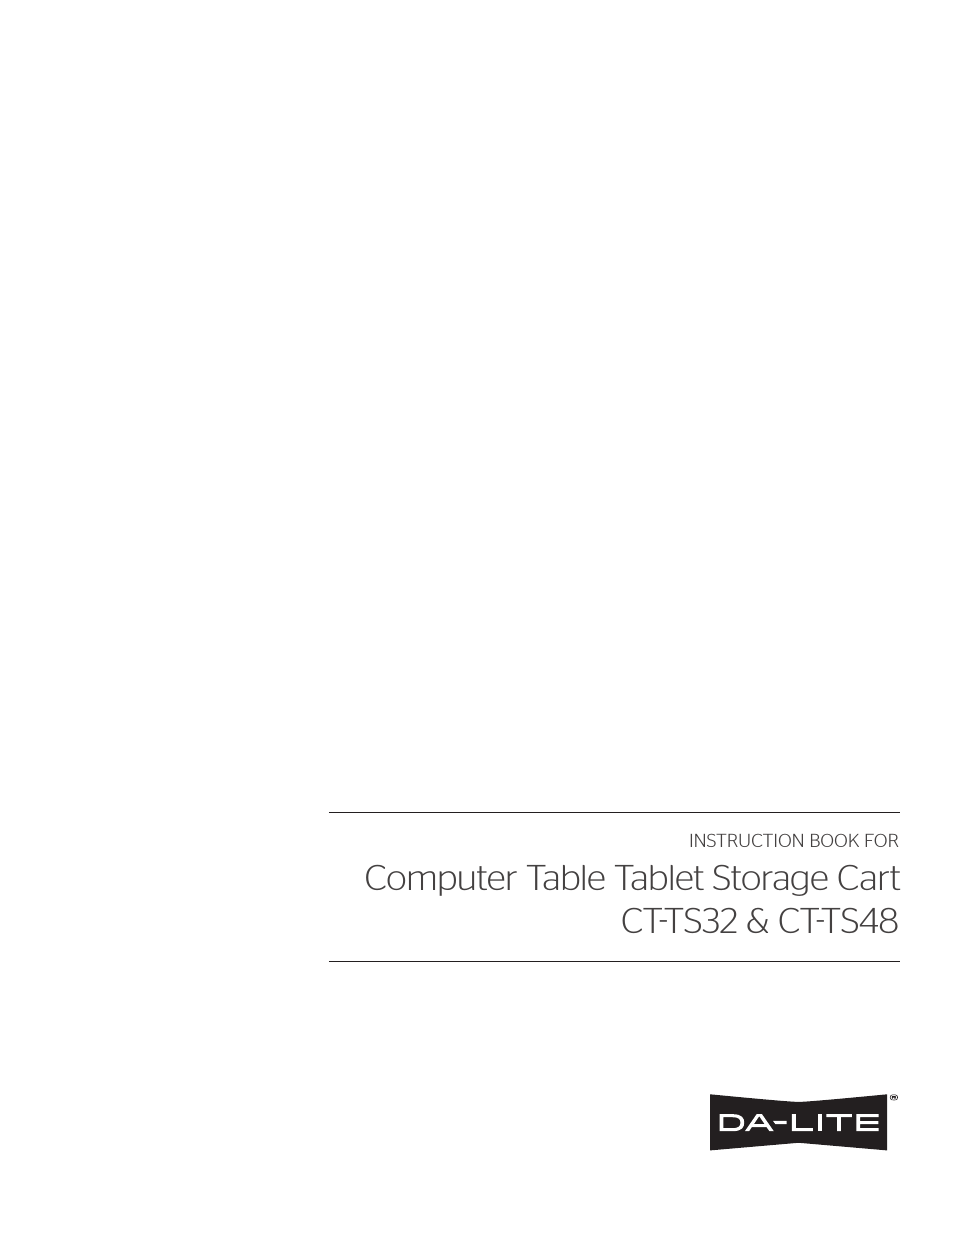 Tablet Sync, Charging and Storage Carts